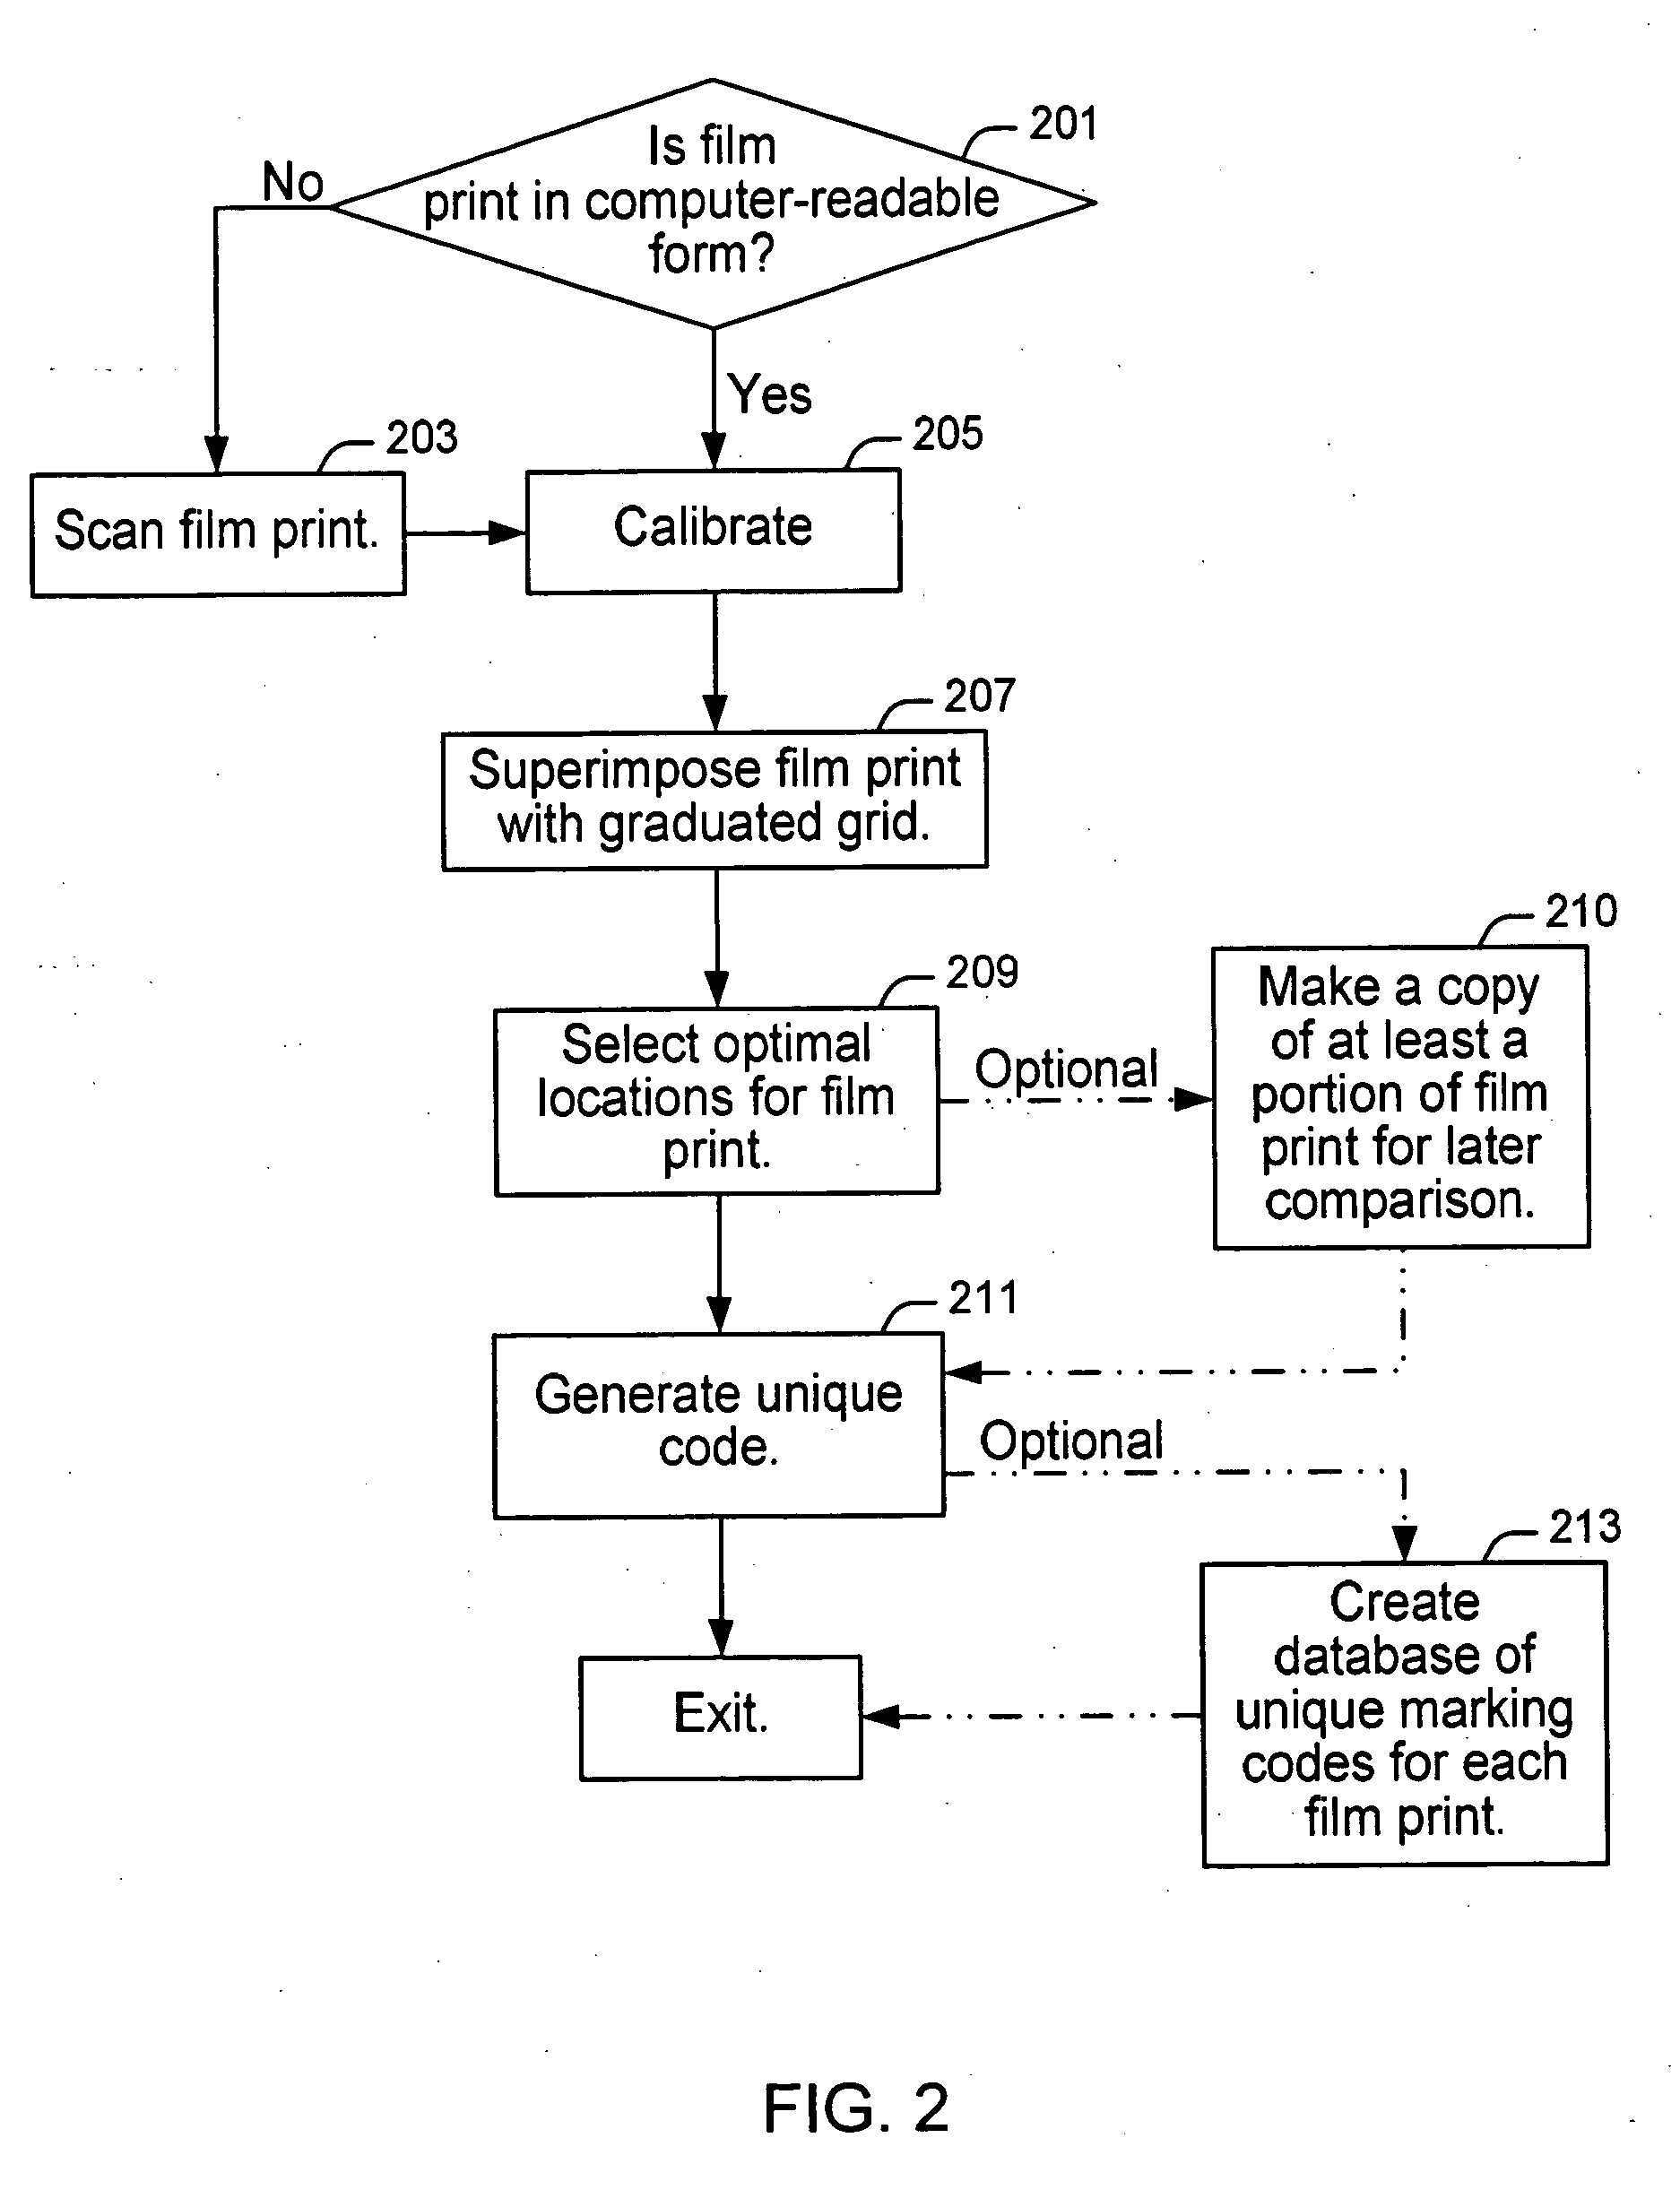 System and method for adaptive marking and coding of film prints